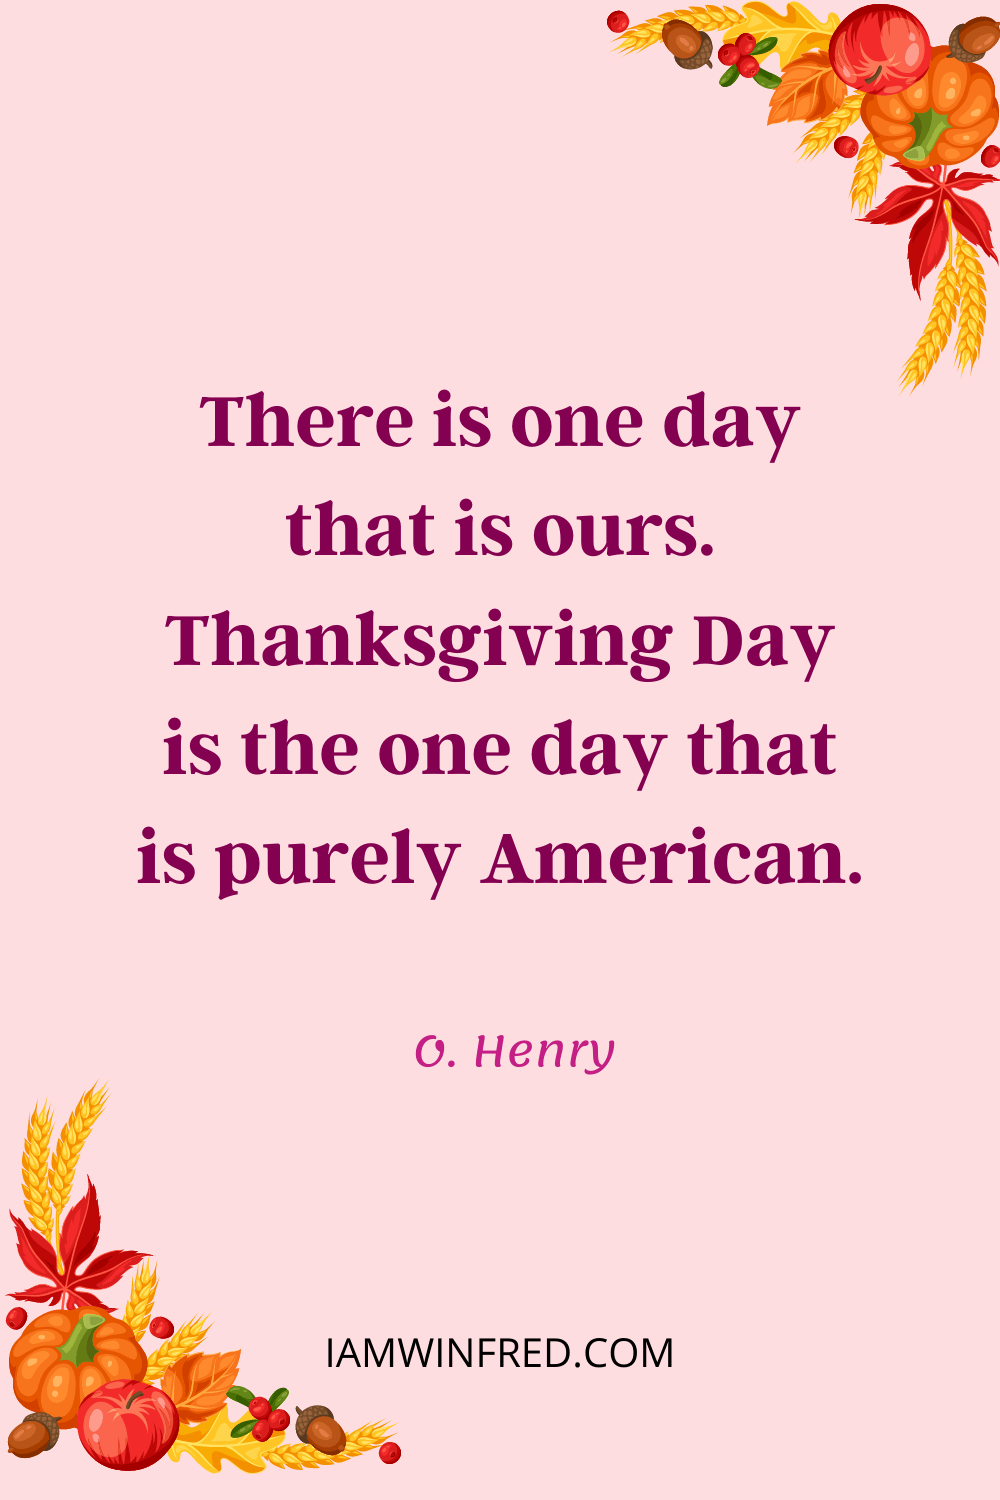 There Is One Day That Is Ours. Thanksgiving Day Is The One Day That Is Purely American.